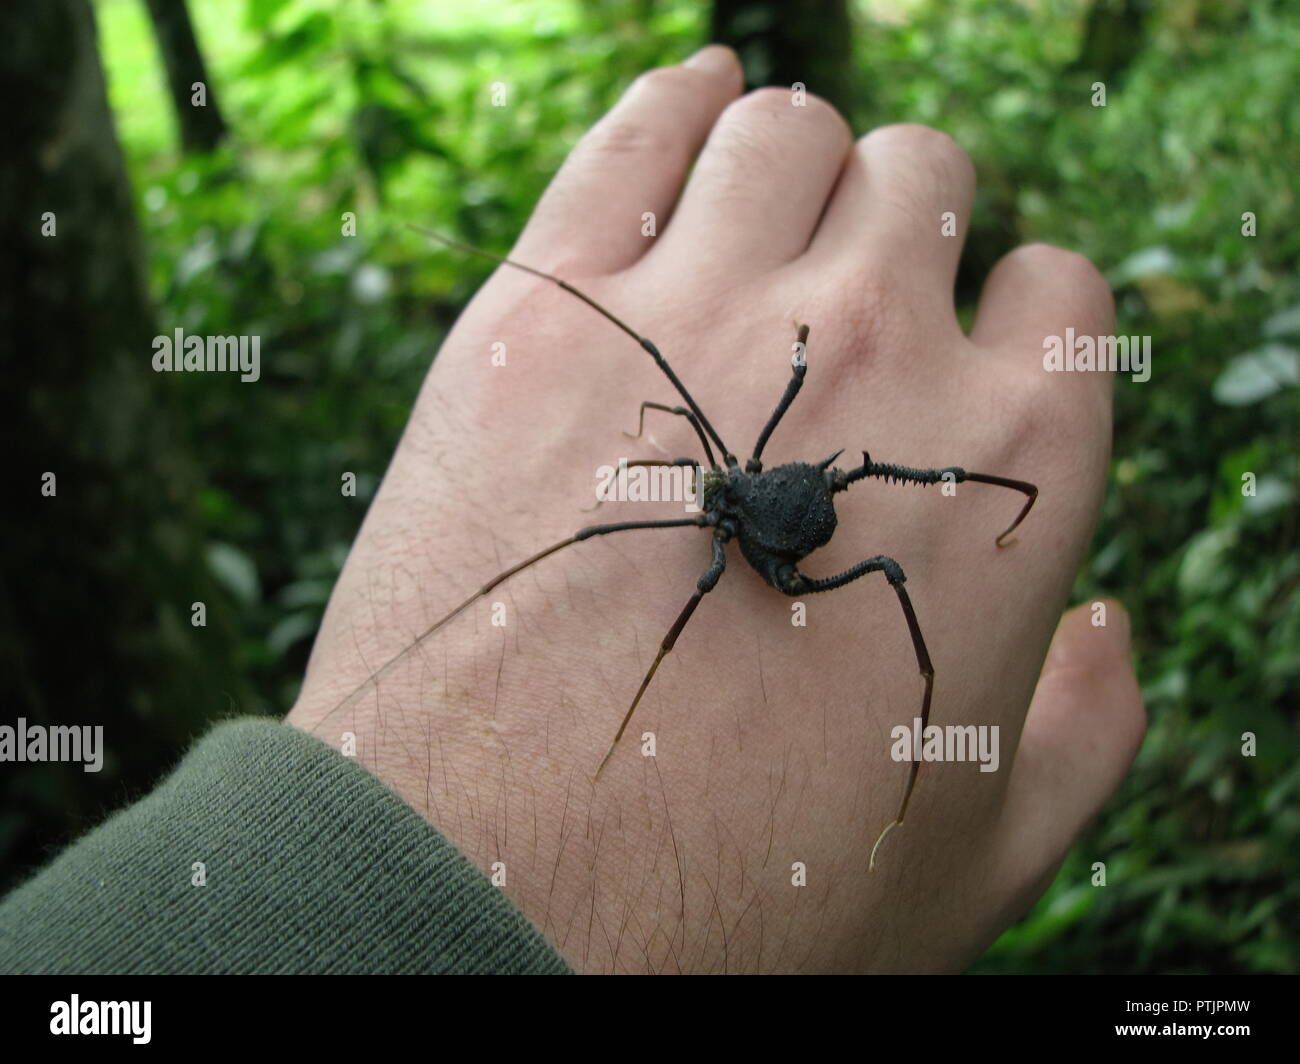 Big harvestman, an arachnid superficially similar to spiders and with the same common name of daddy long legs, being handled on a forest background. Stock Photo